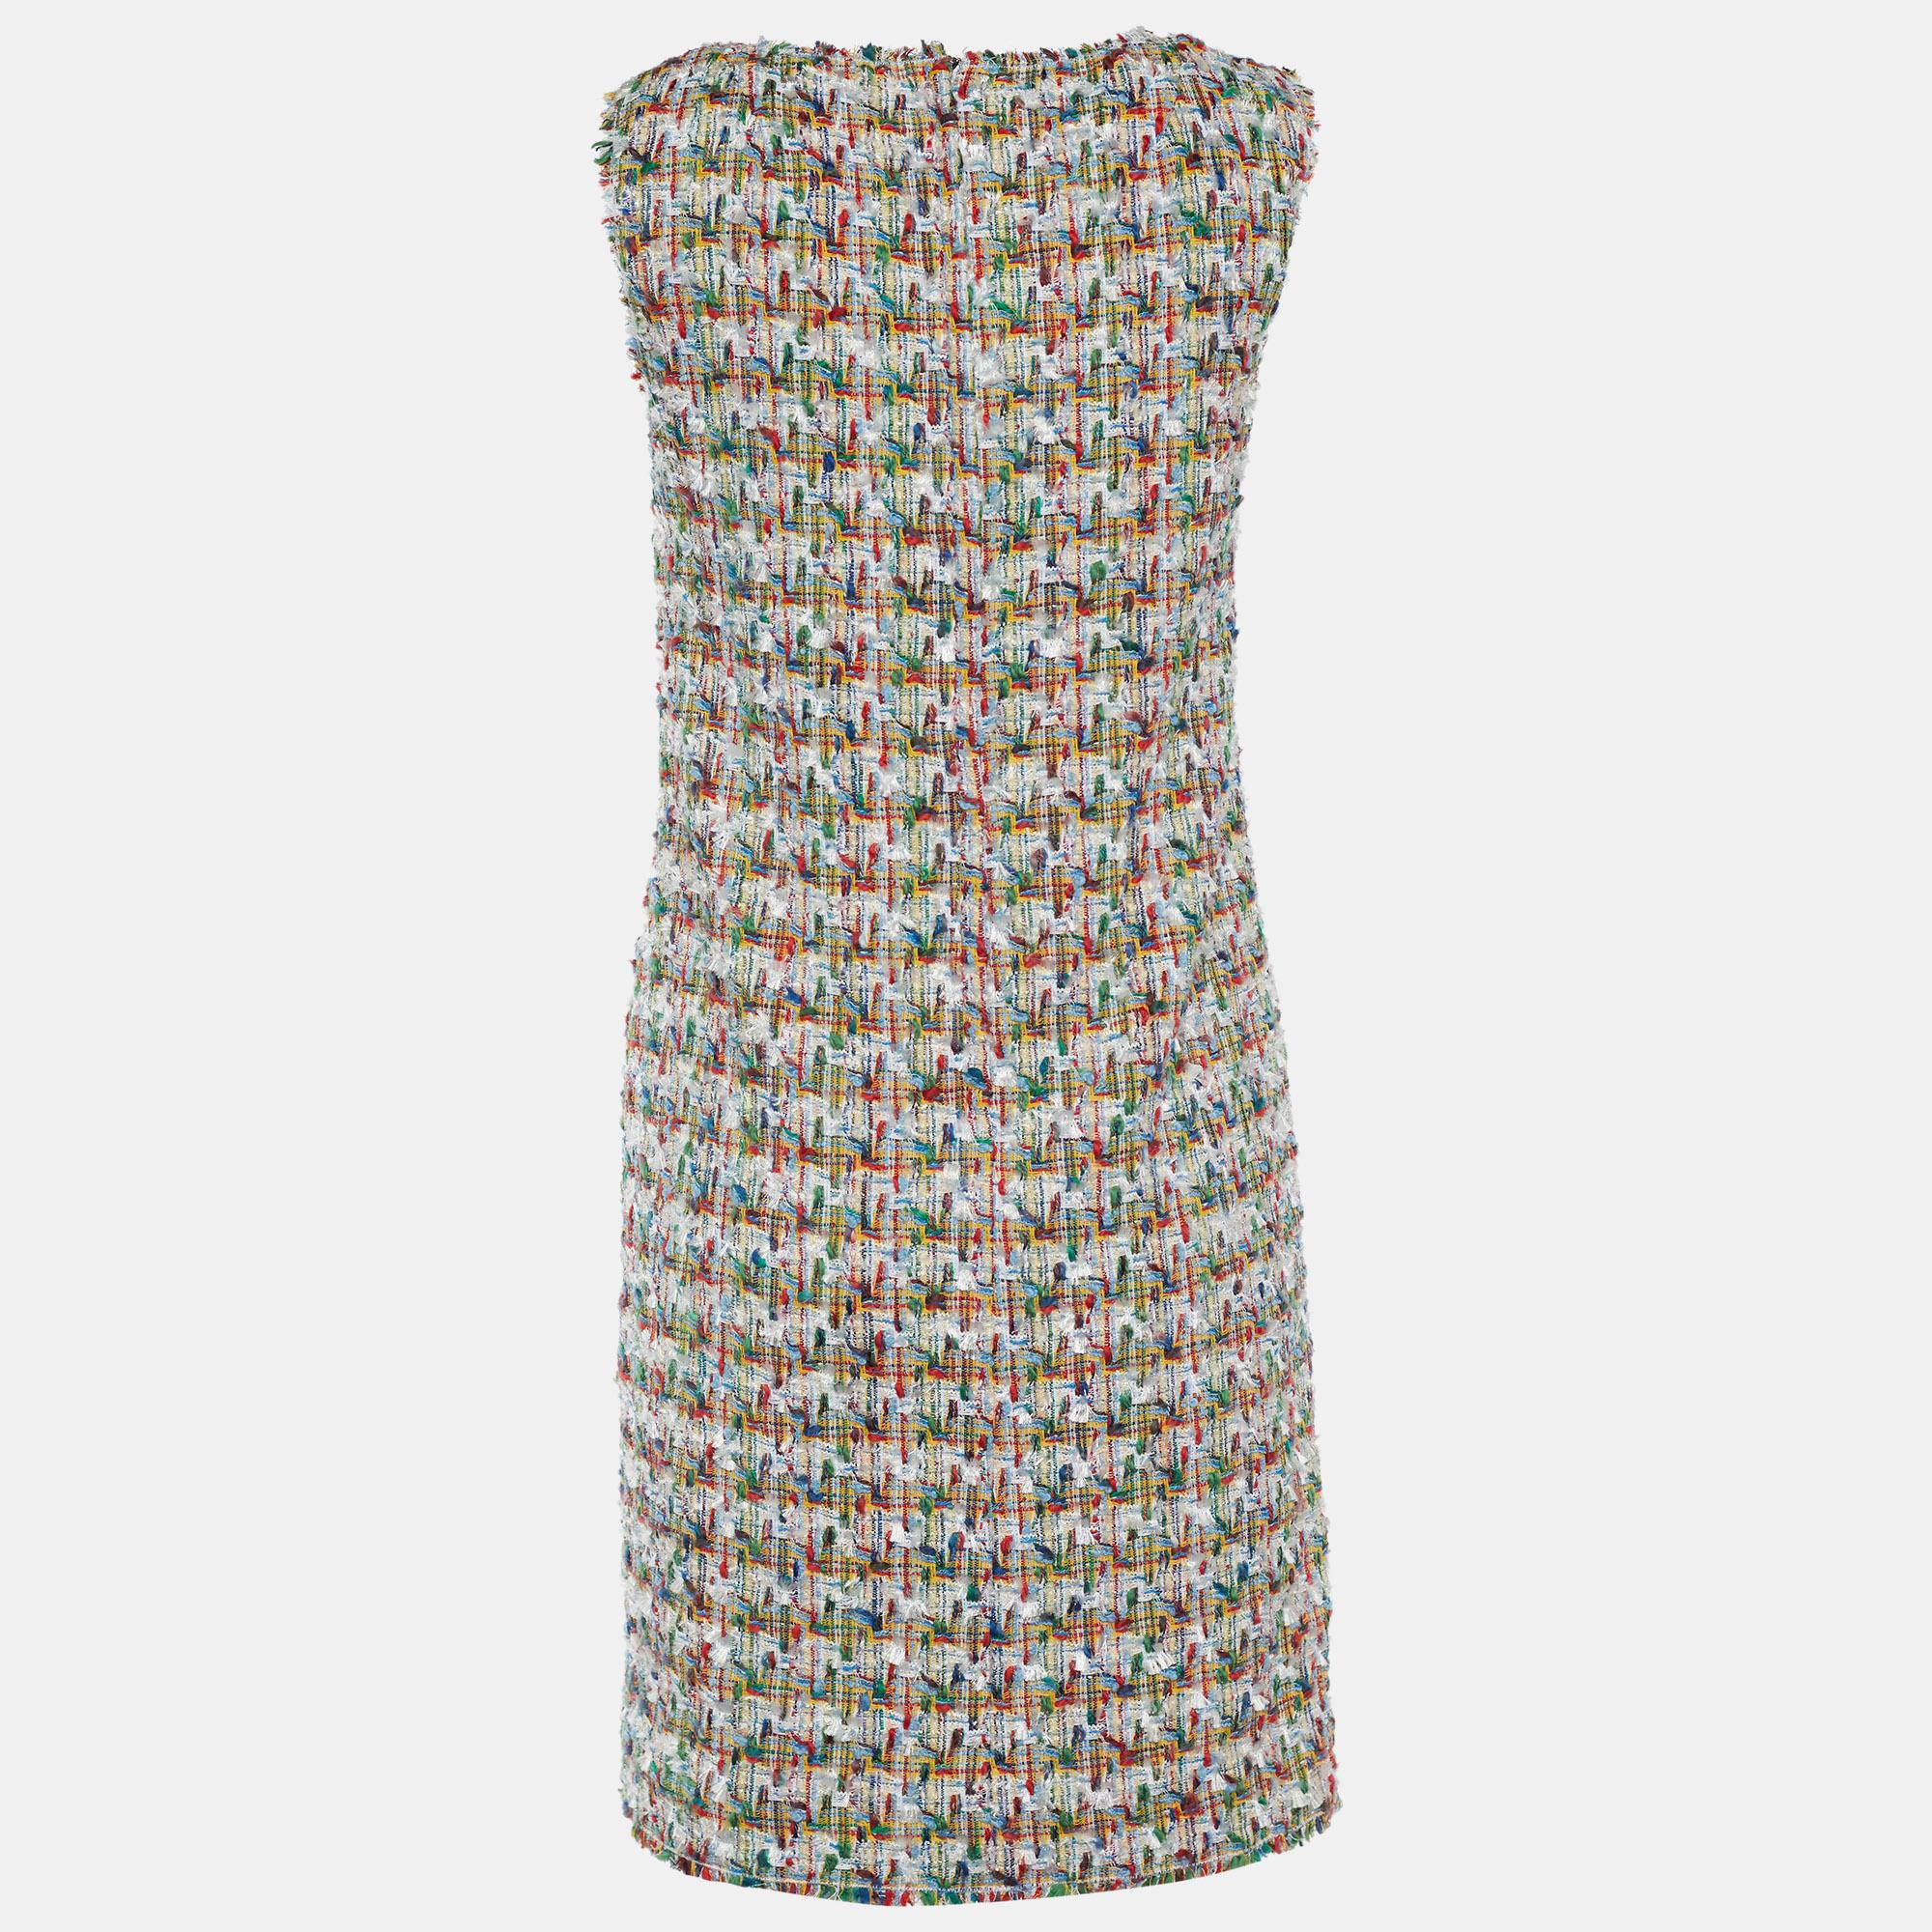 Looking for work-appropriate outfits that make you look stylish and sophisticated? Well, look no further. This shift dress from Dolce & Gabbana is the best buy to flaunt oodles of elegance and confidence. It is cut from multicolored tweed fabric and